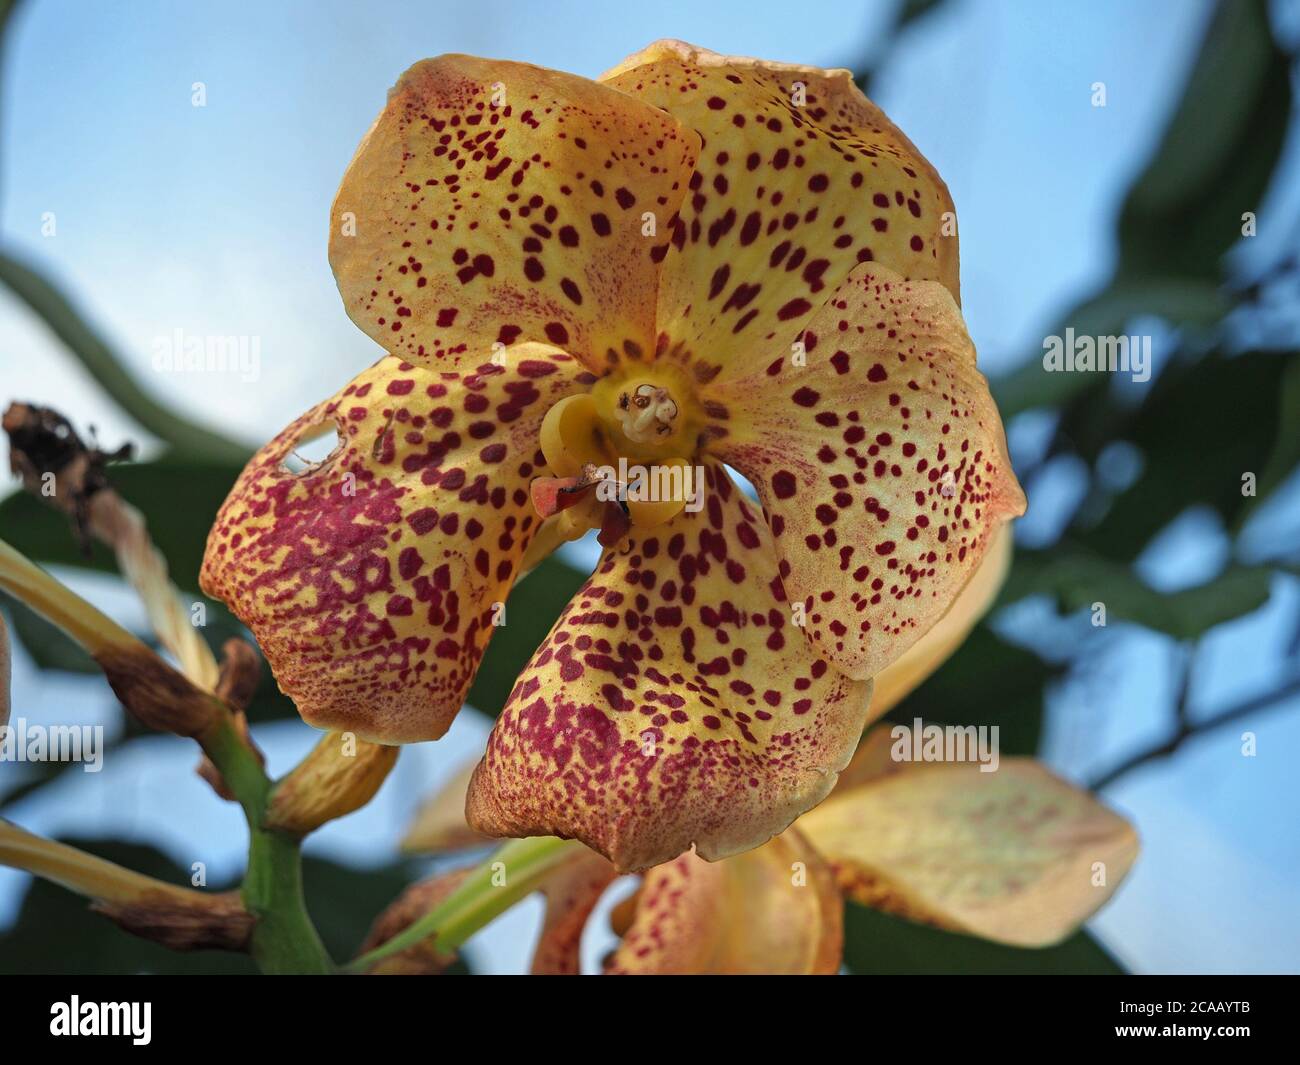 display of exotic tropical orchid flowers with bold wine chocolate spots on gold petals & sepals and gold labellum and lip Stock Photo